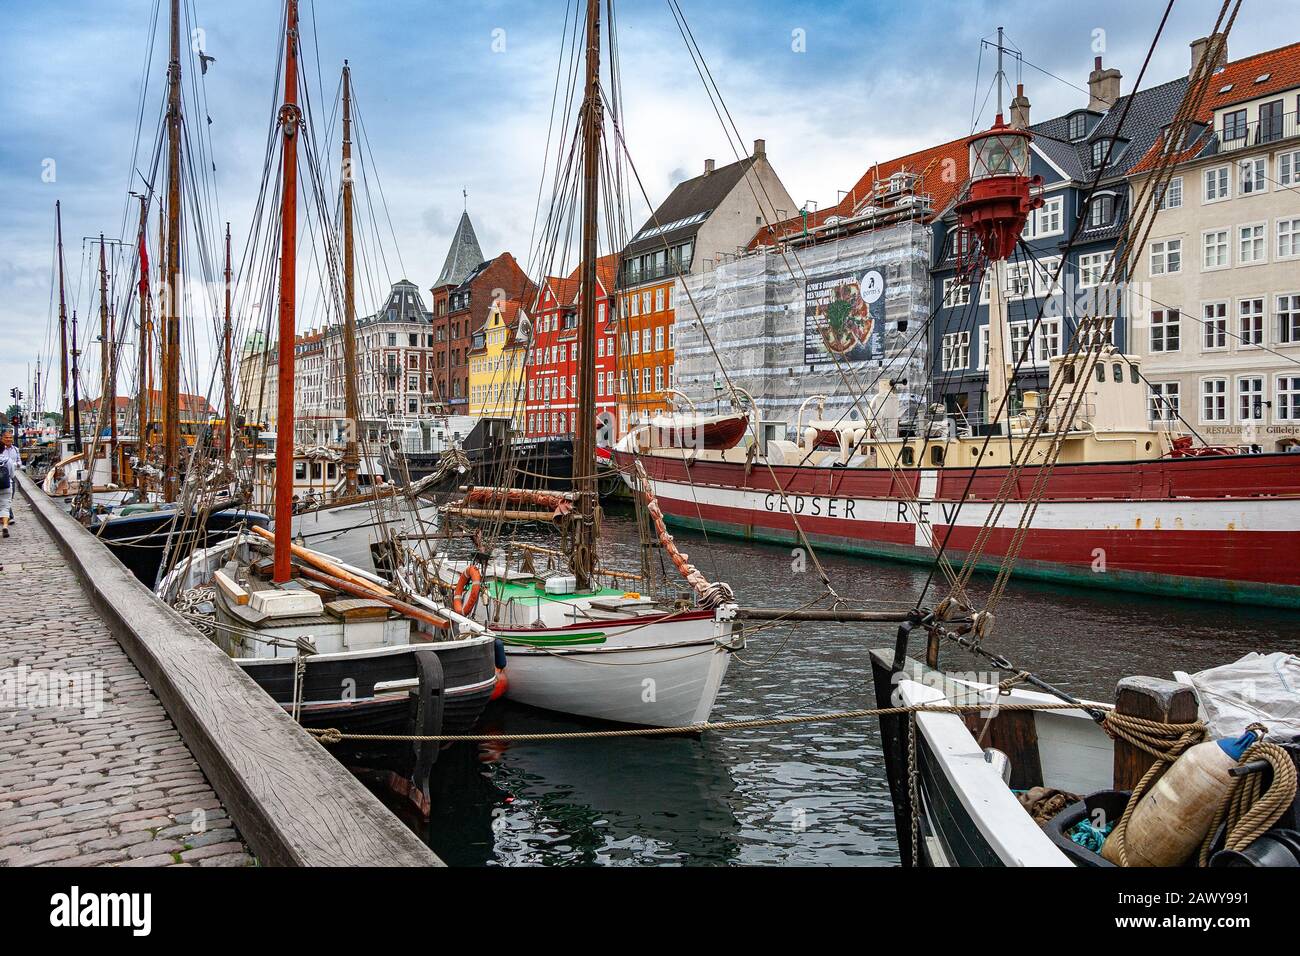 Gedser Rev, museum ship on Nyhavn canal Stock Photo